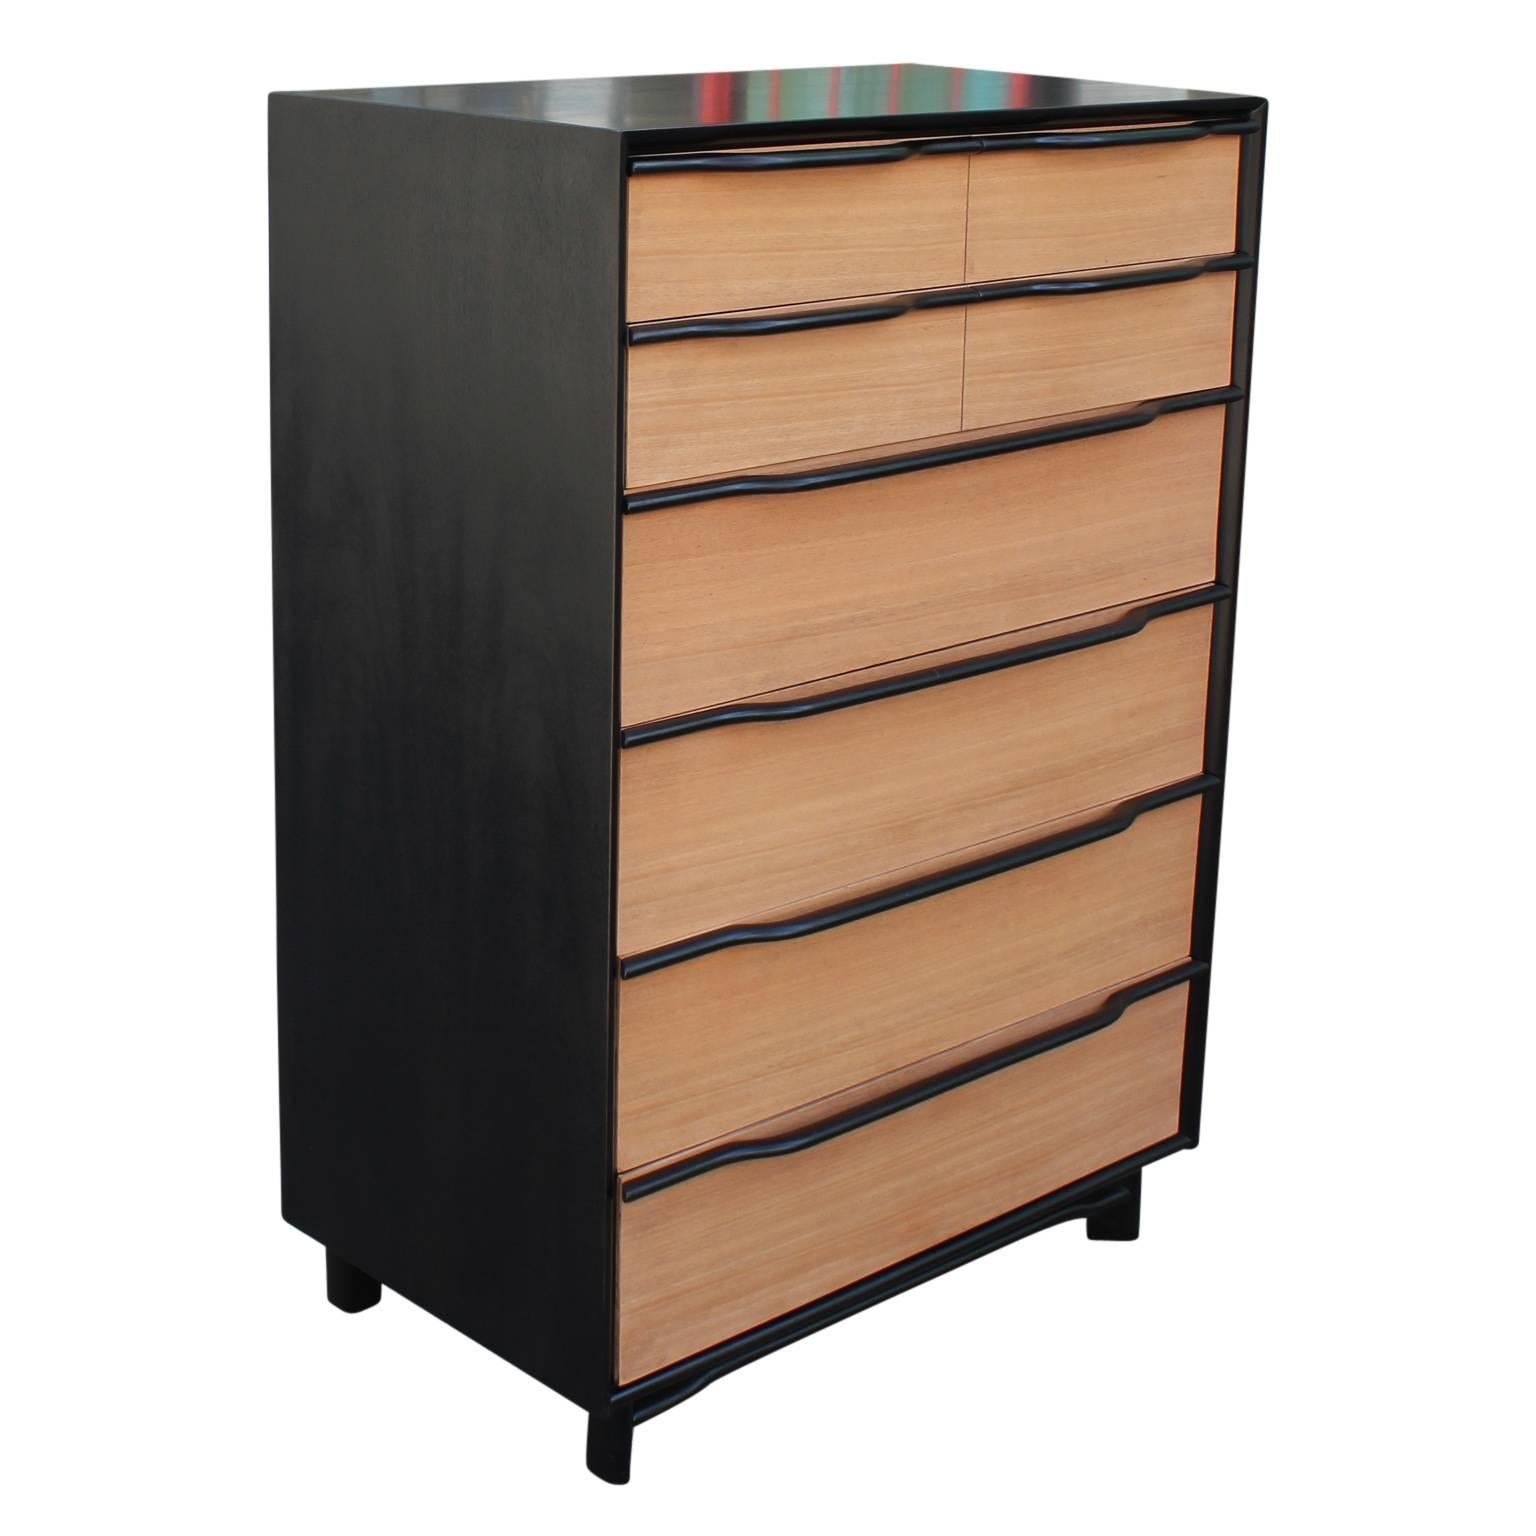 Mahogany Two Tone Modern Tall Dresser by Hickory Manufacturing